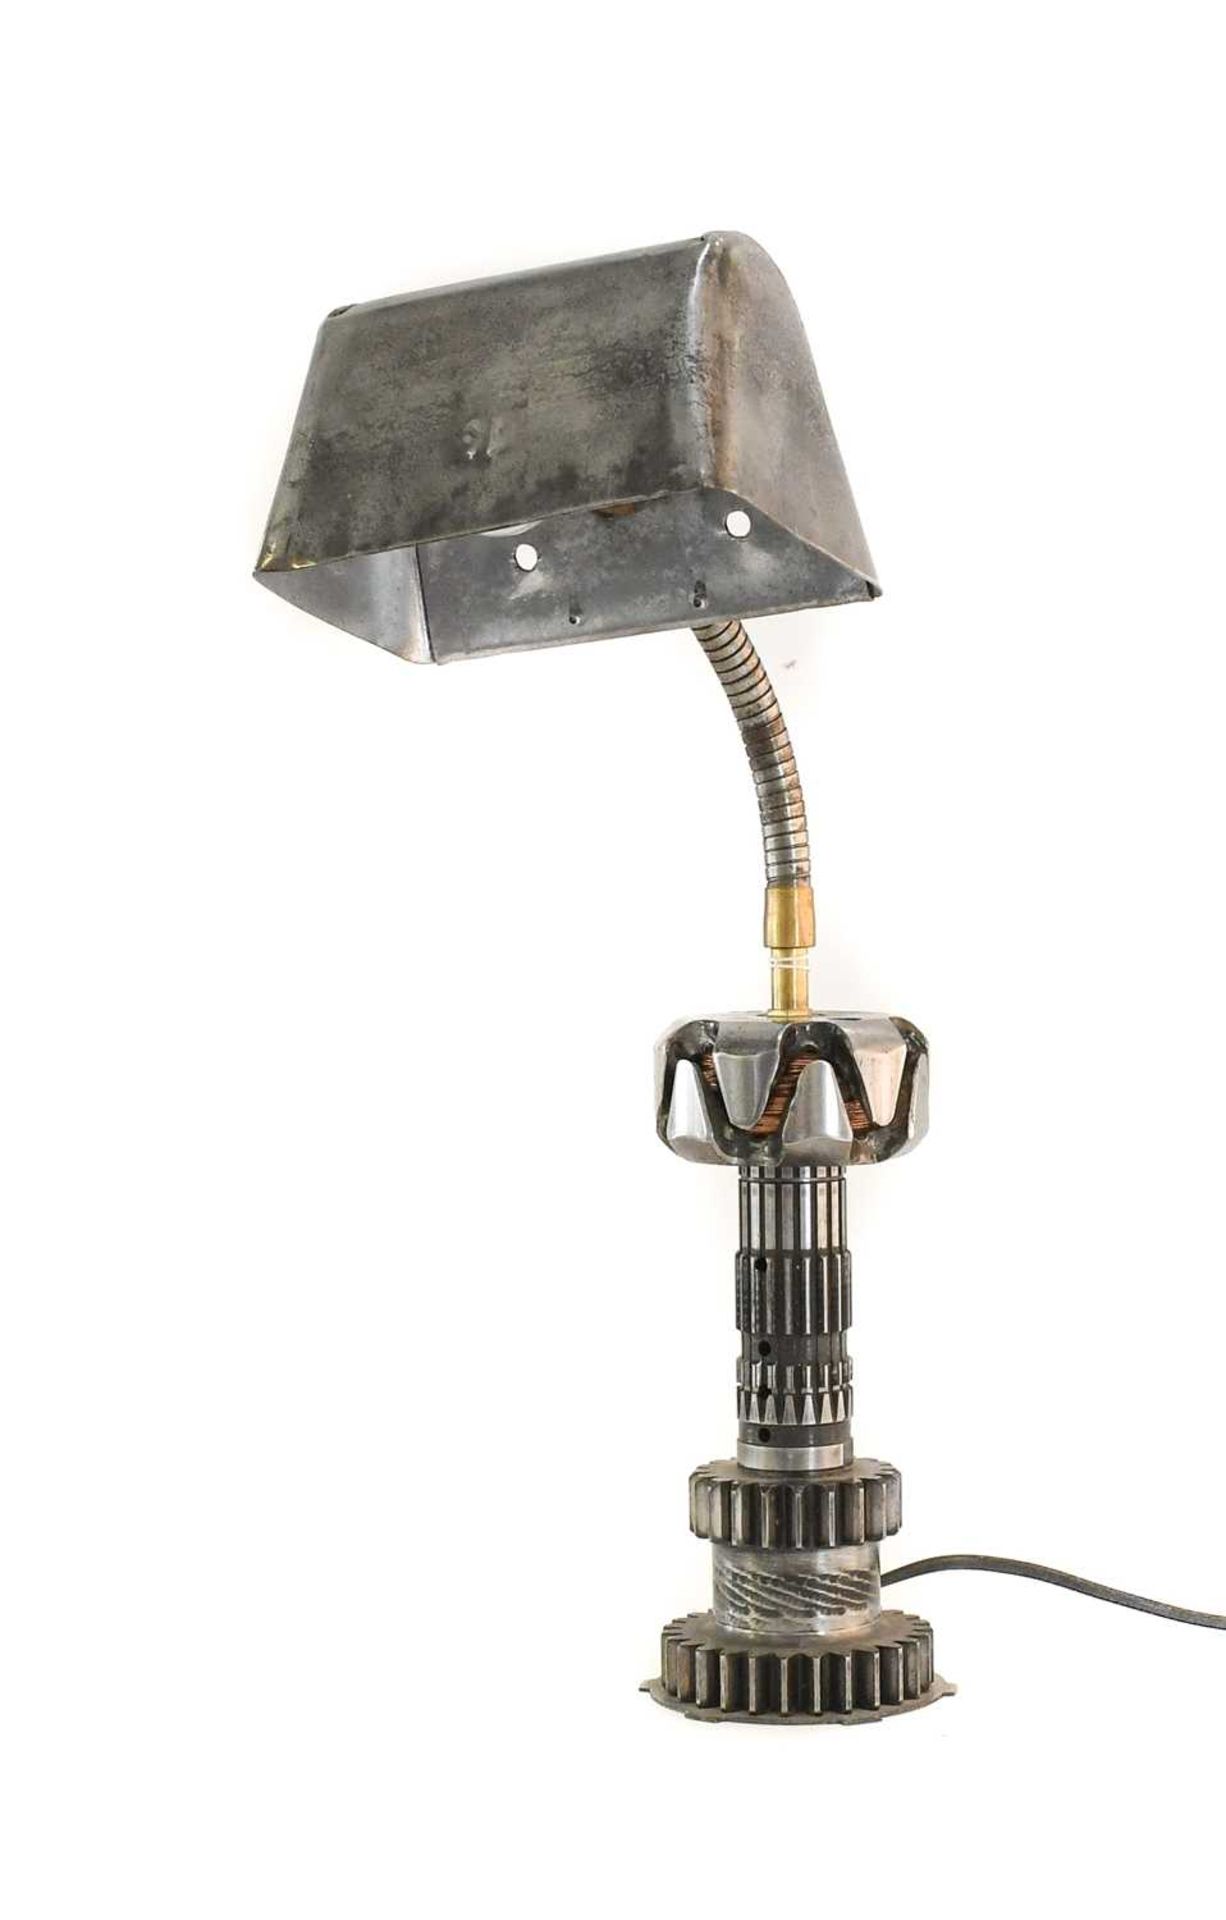 Karl-Hugo Mars: An Adjustable Table Lamp, late 20th century, constructed from car parts, with copper